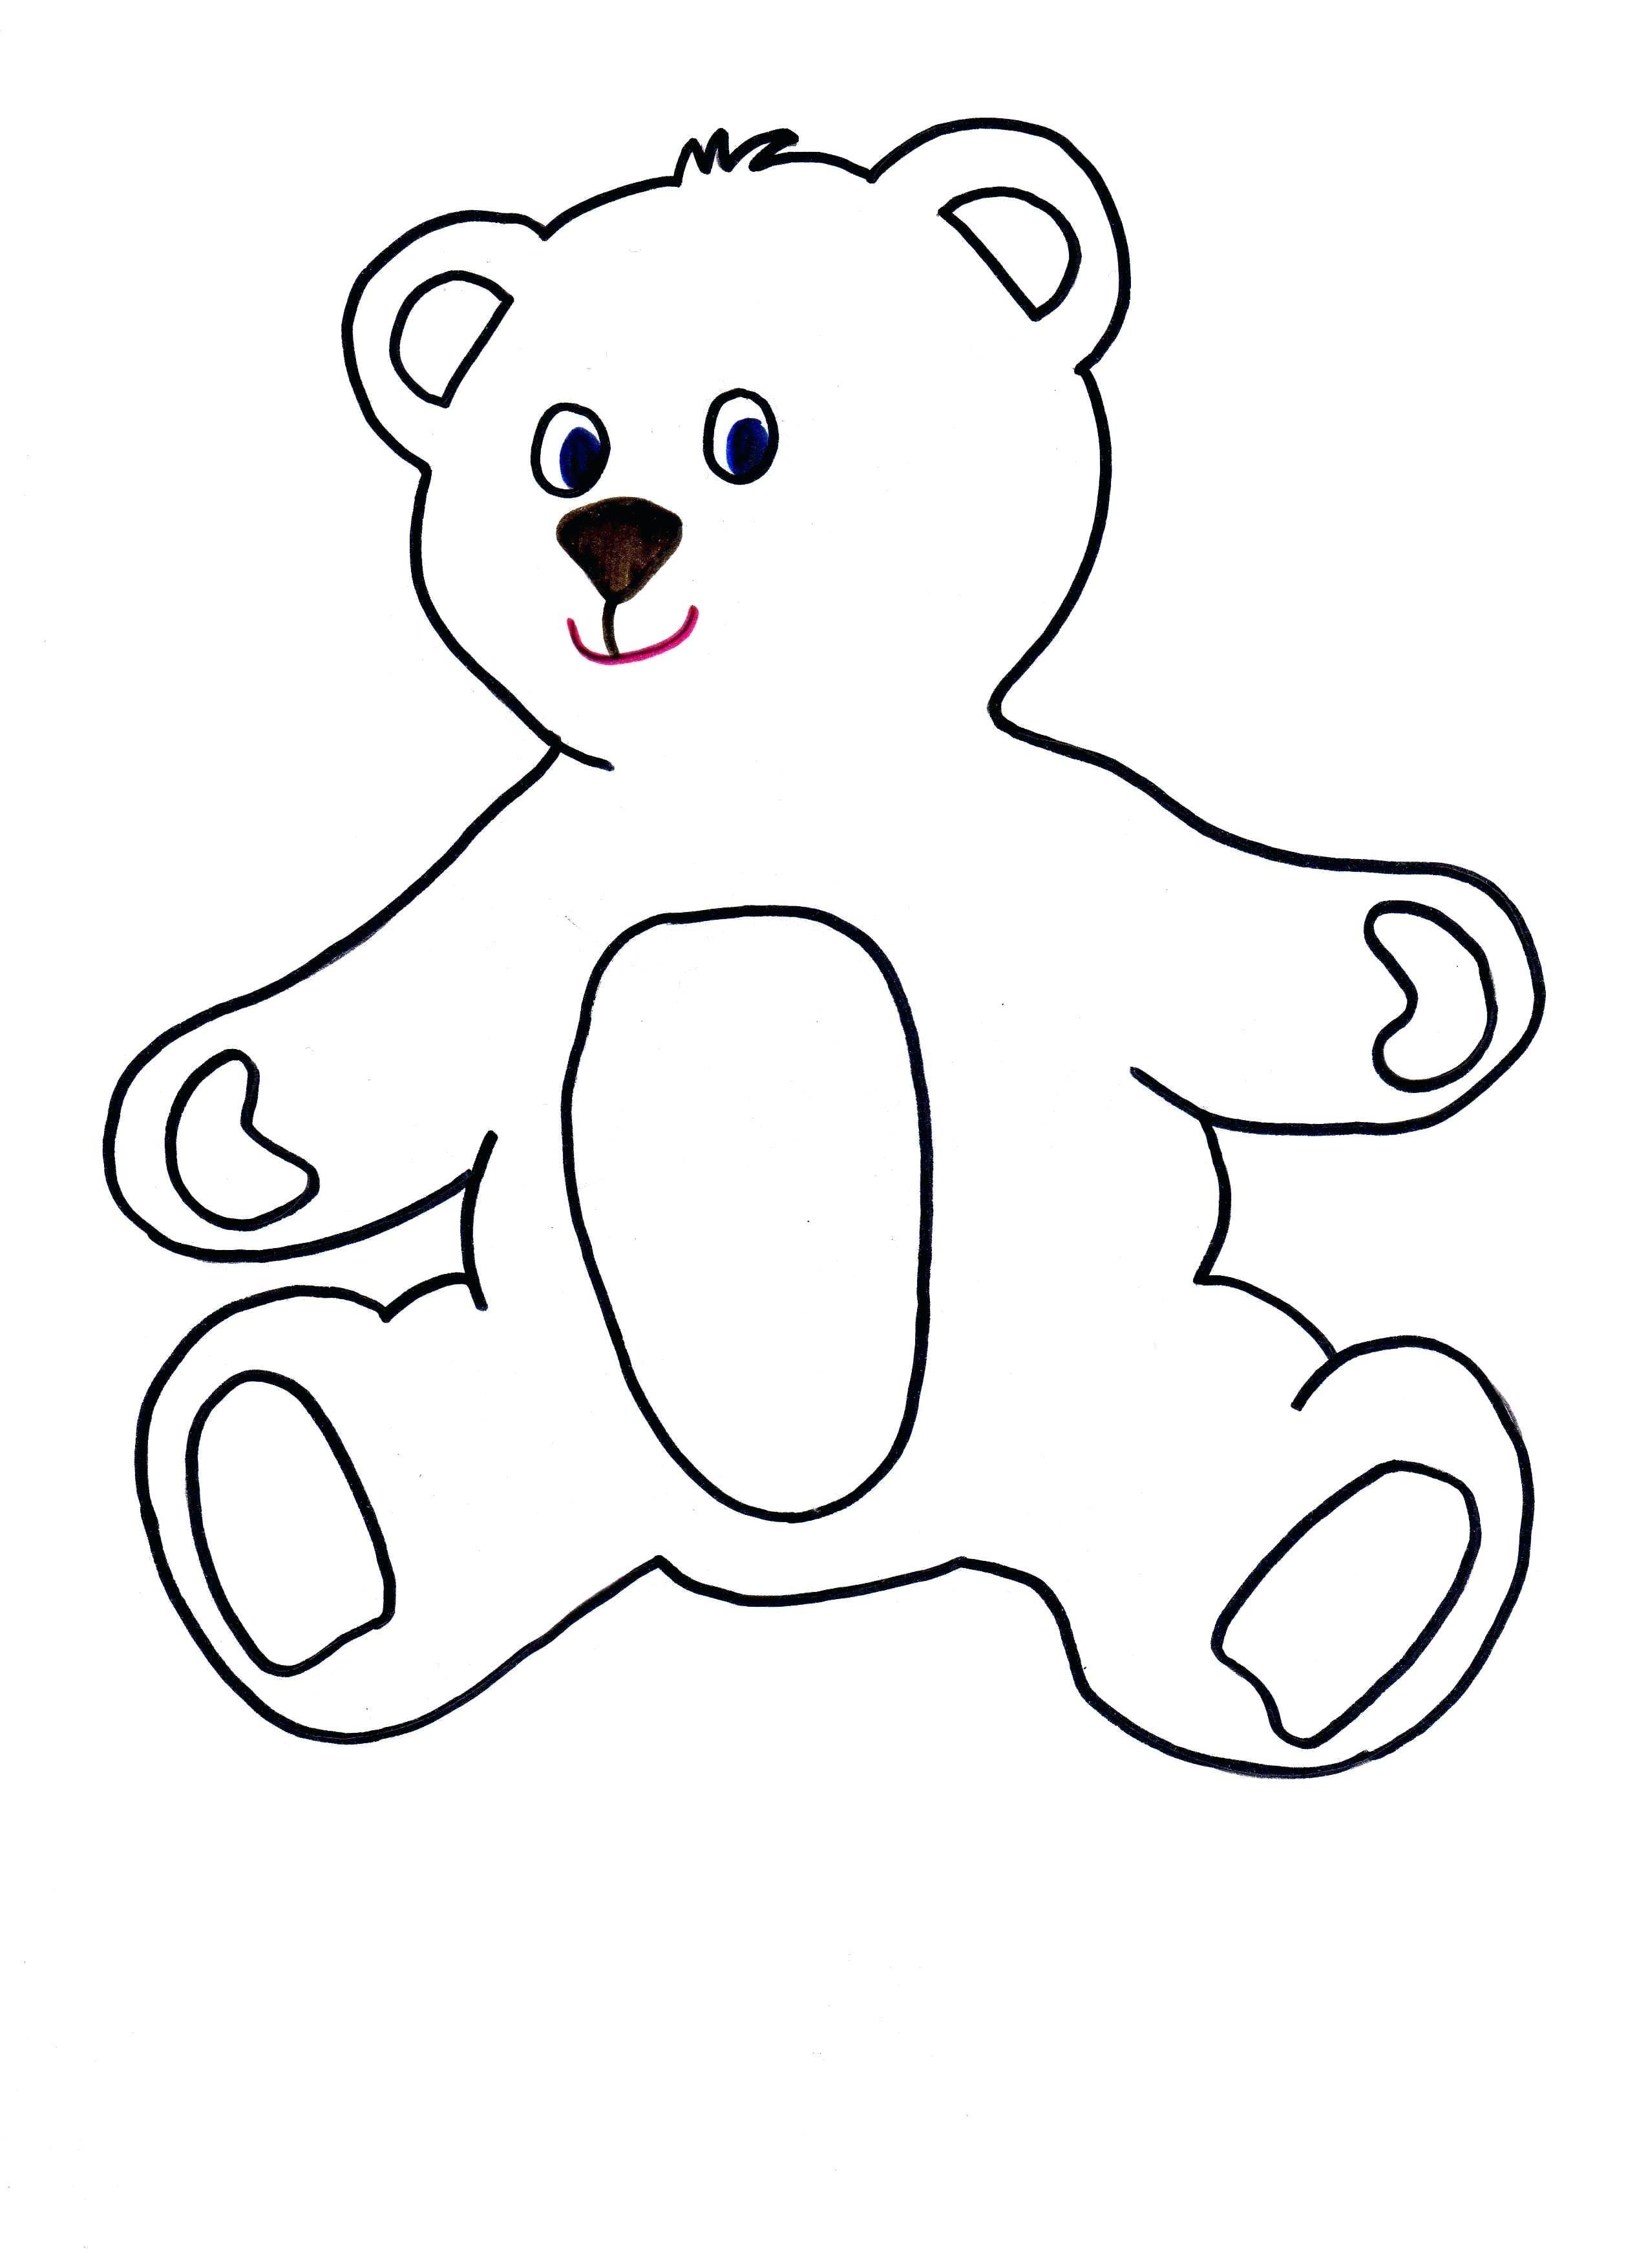 teddy-bear-outline-free-download-on-clipartmag